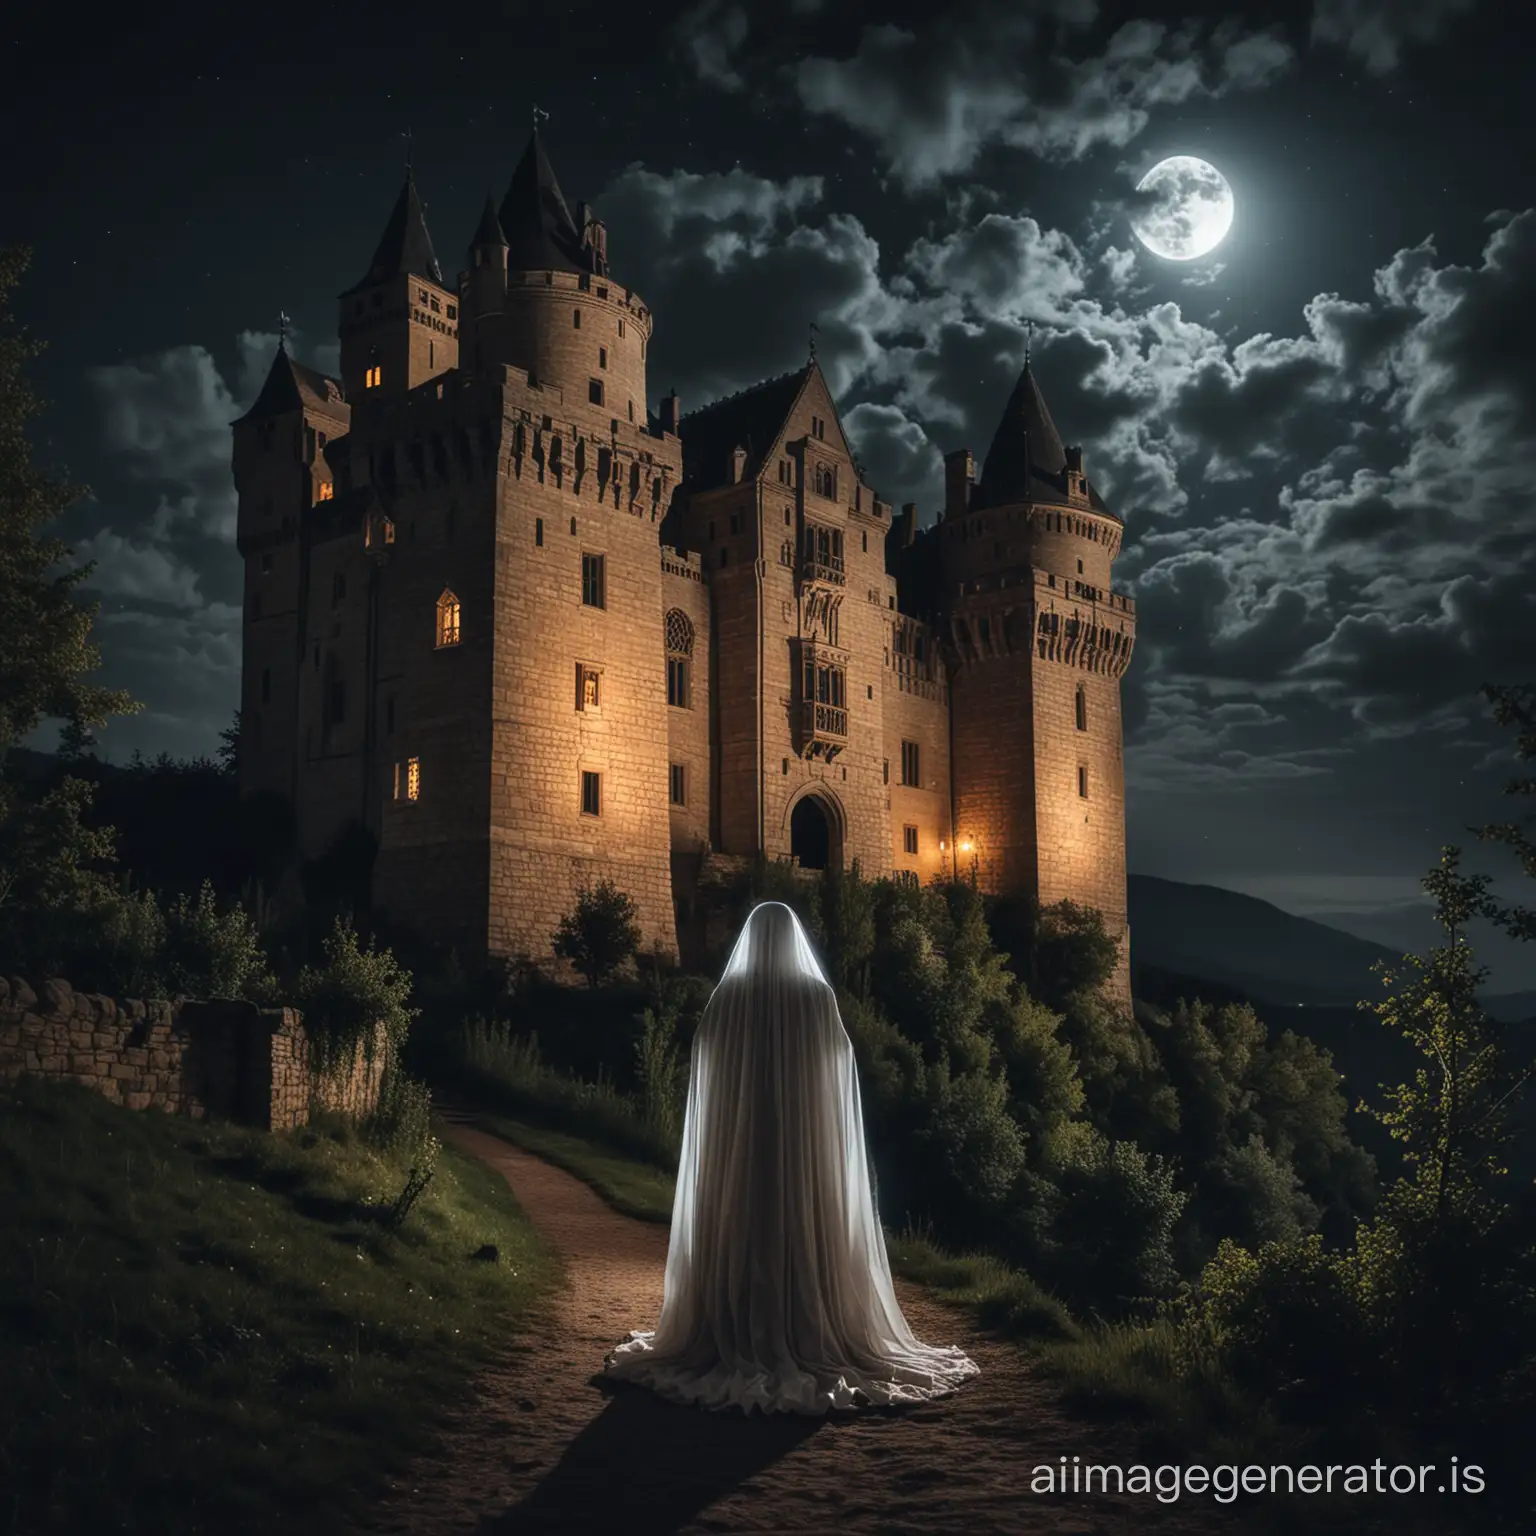 15th century castle with a ghost at night